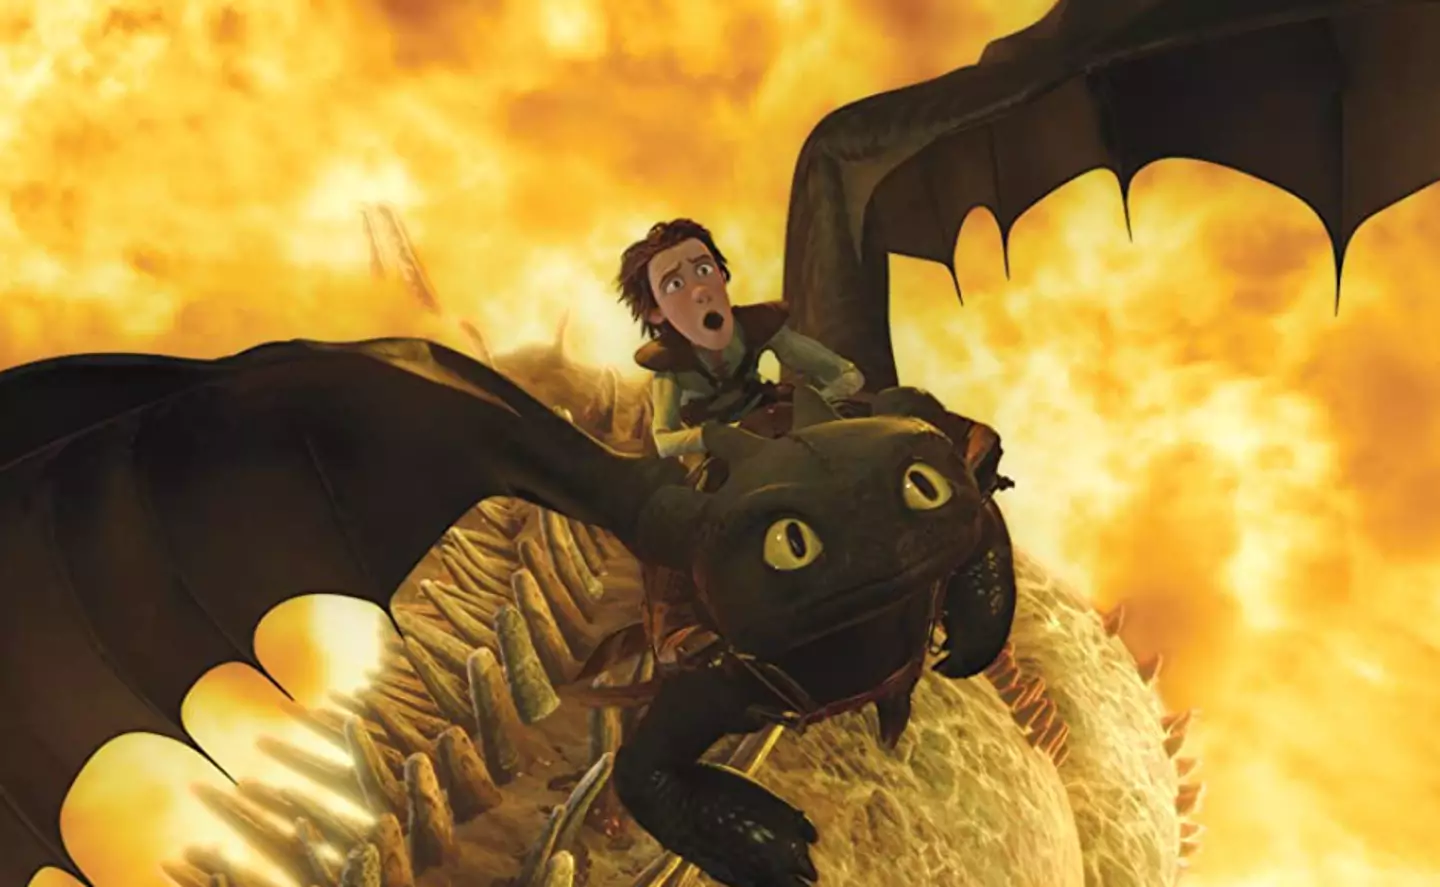 A live-action remake of 'How To Train Your Dragon' is in the works.